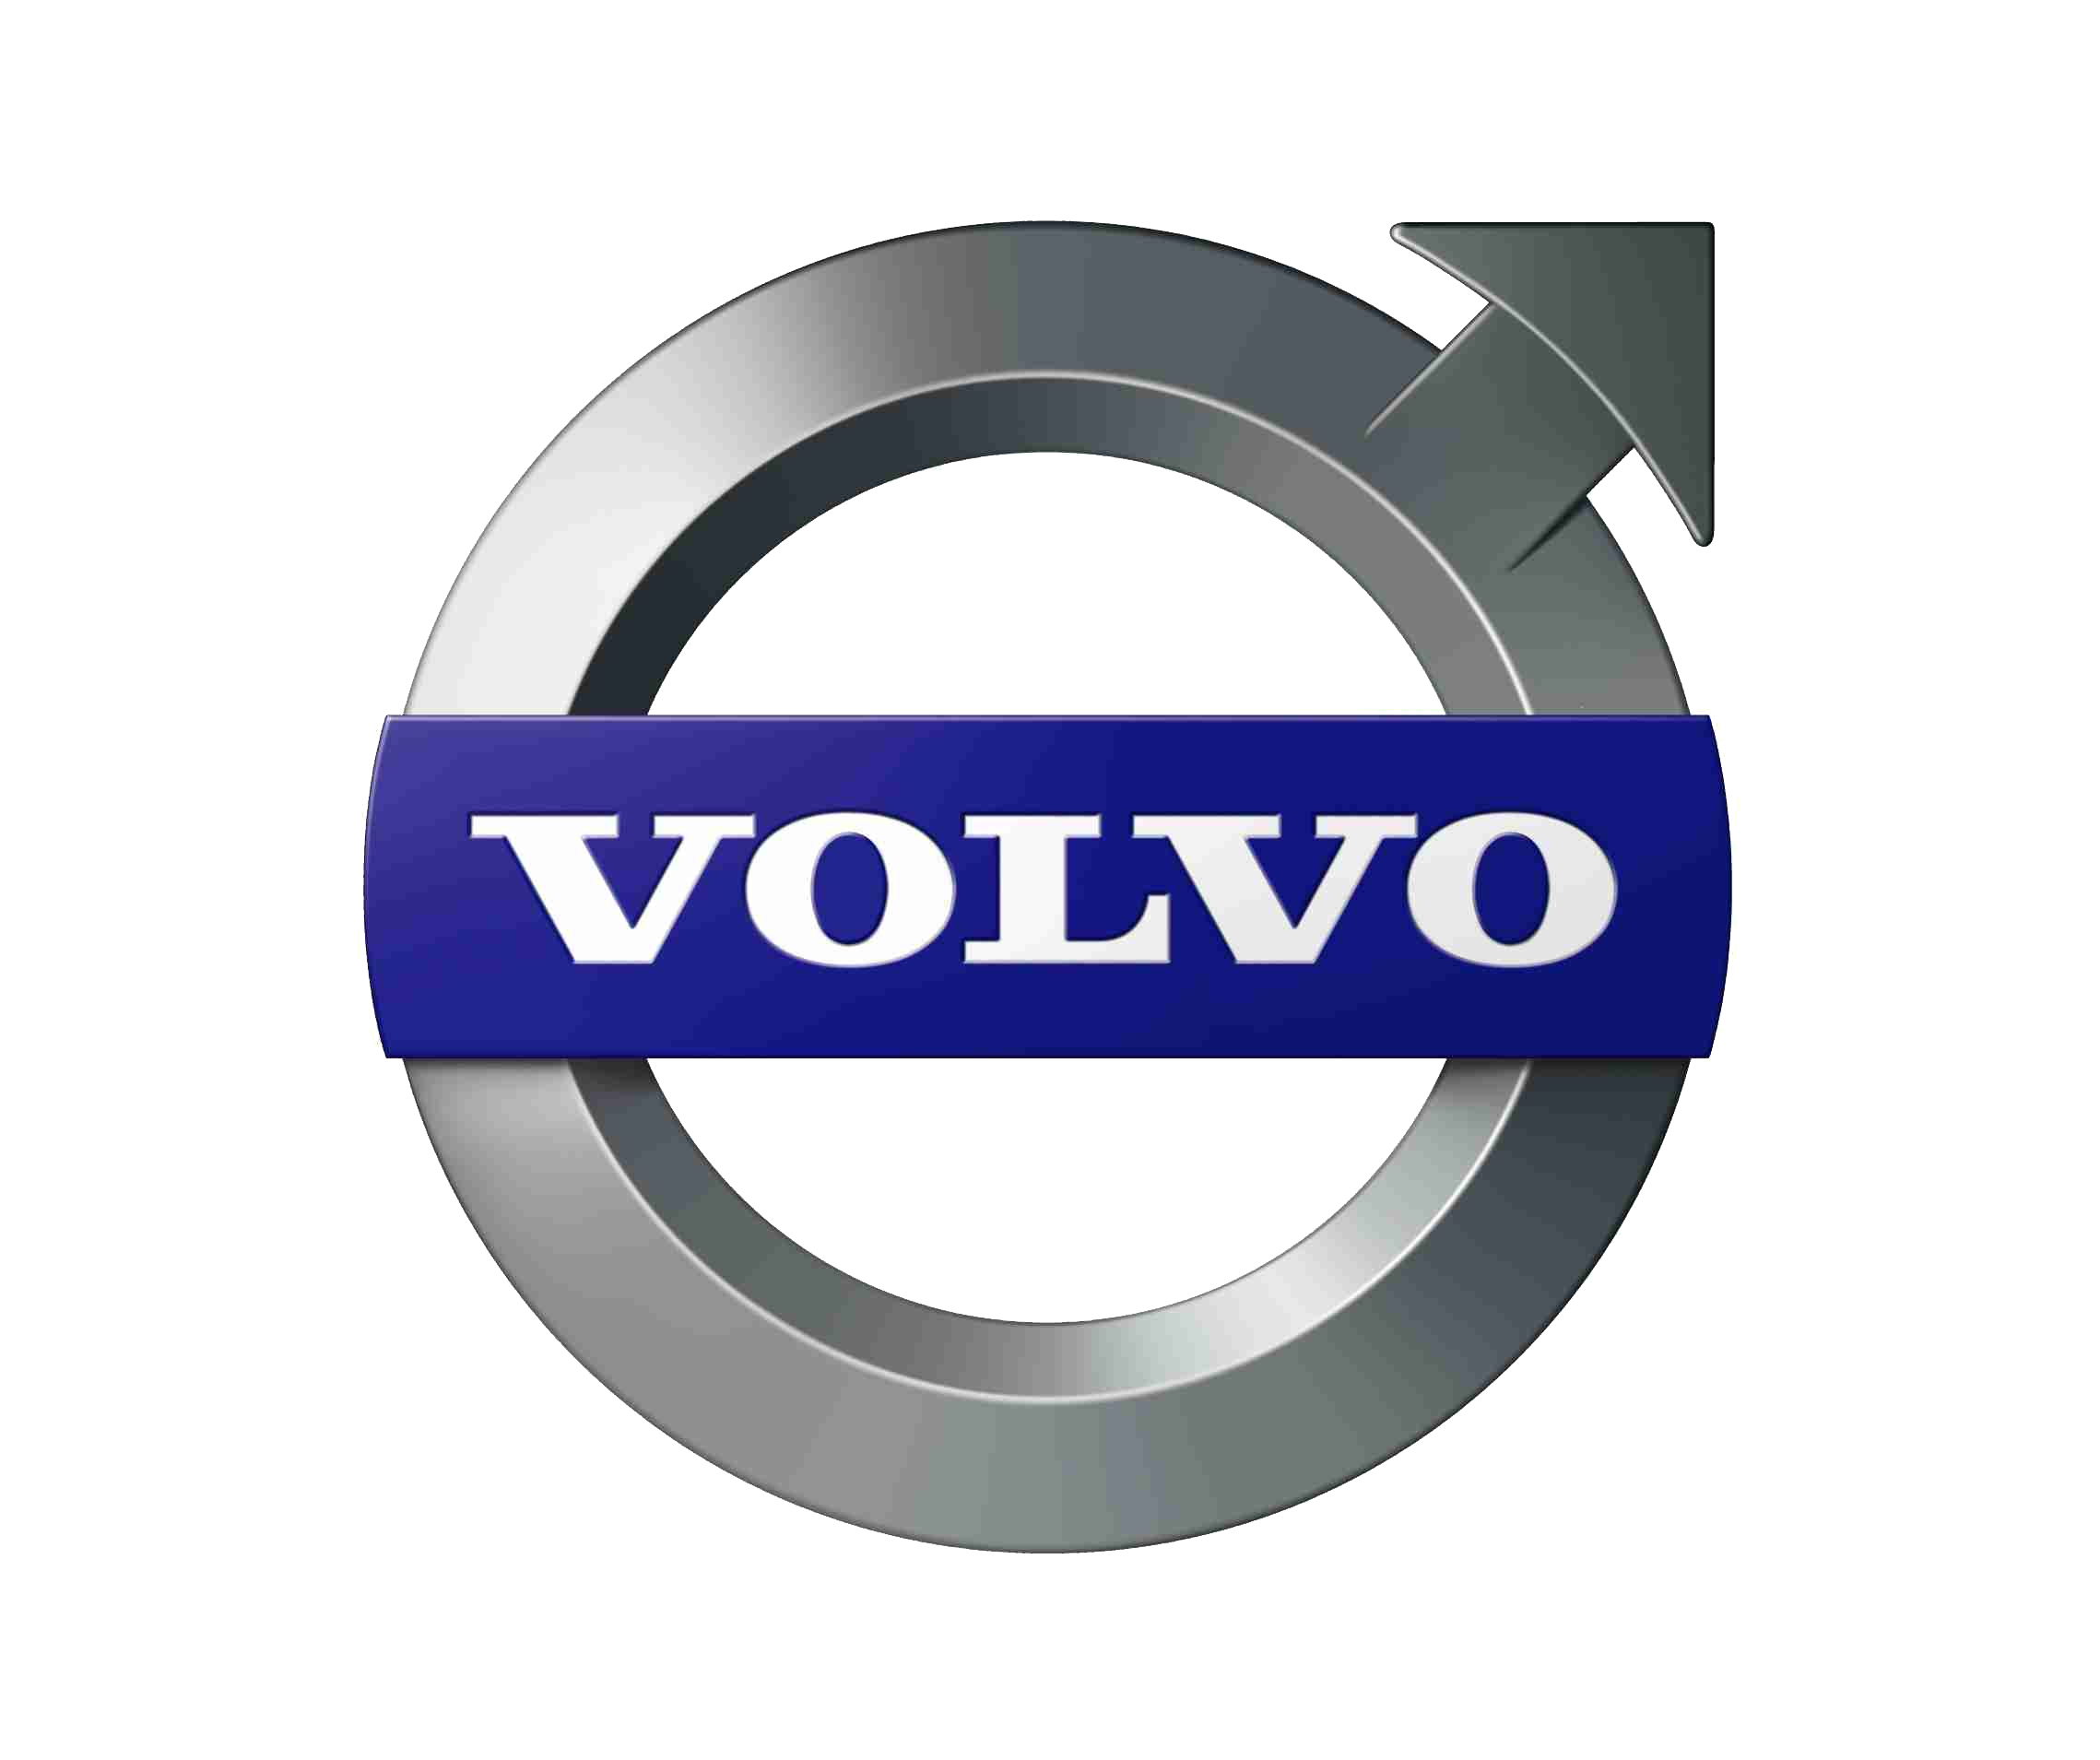 Volvo logo PNG, Volvo PNG - Free PNG